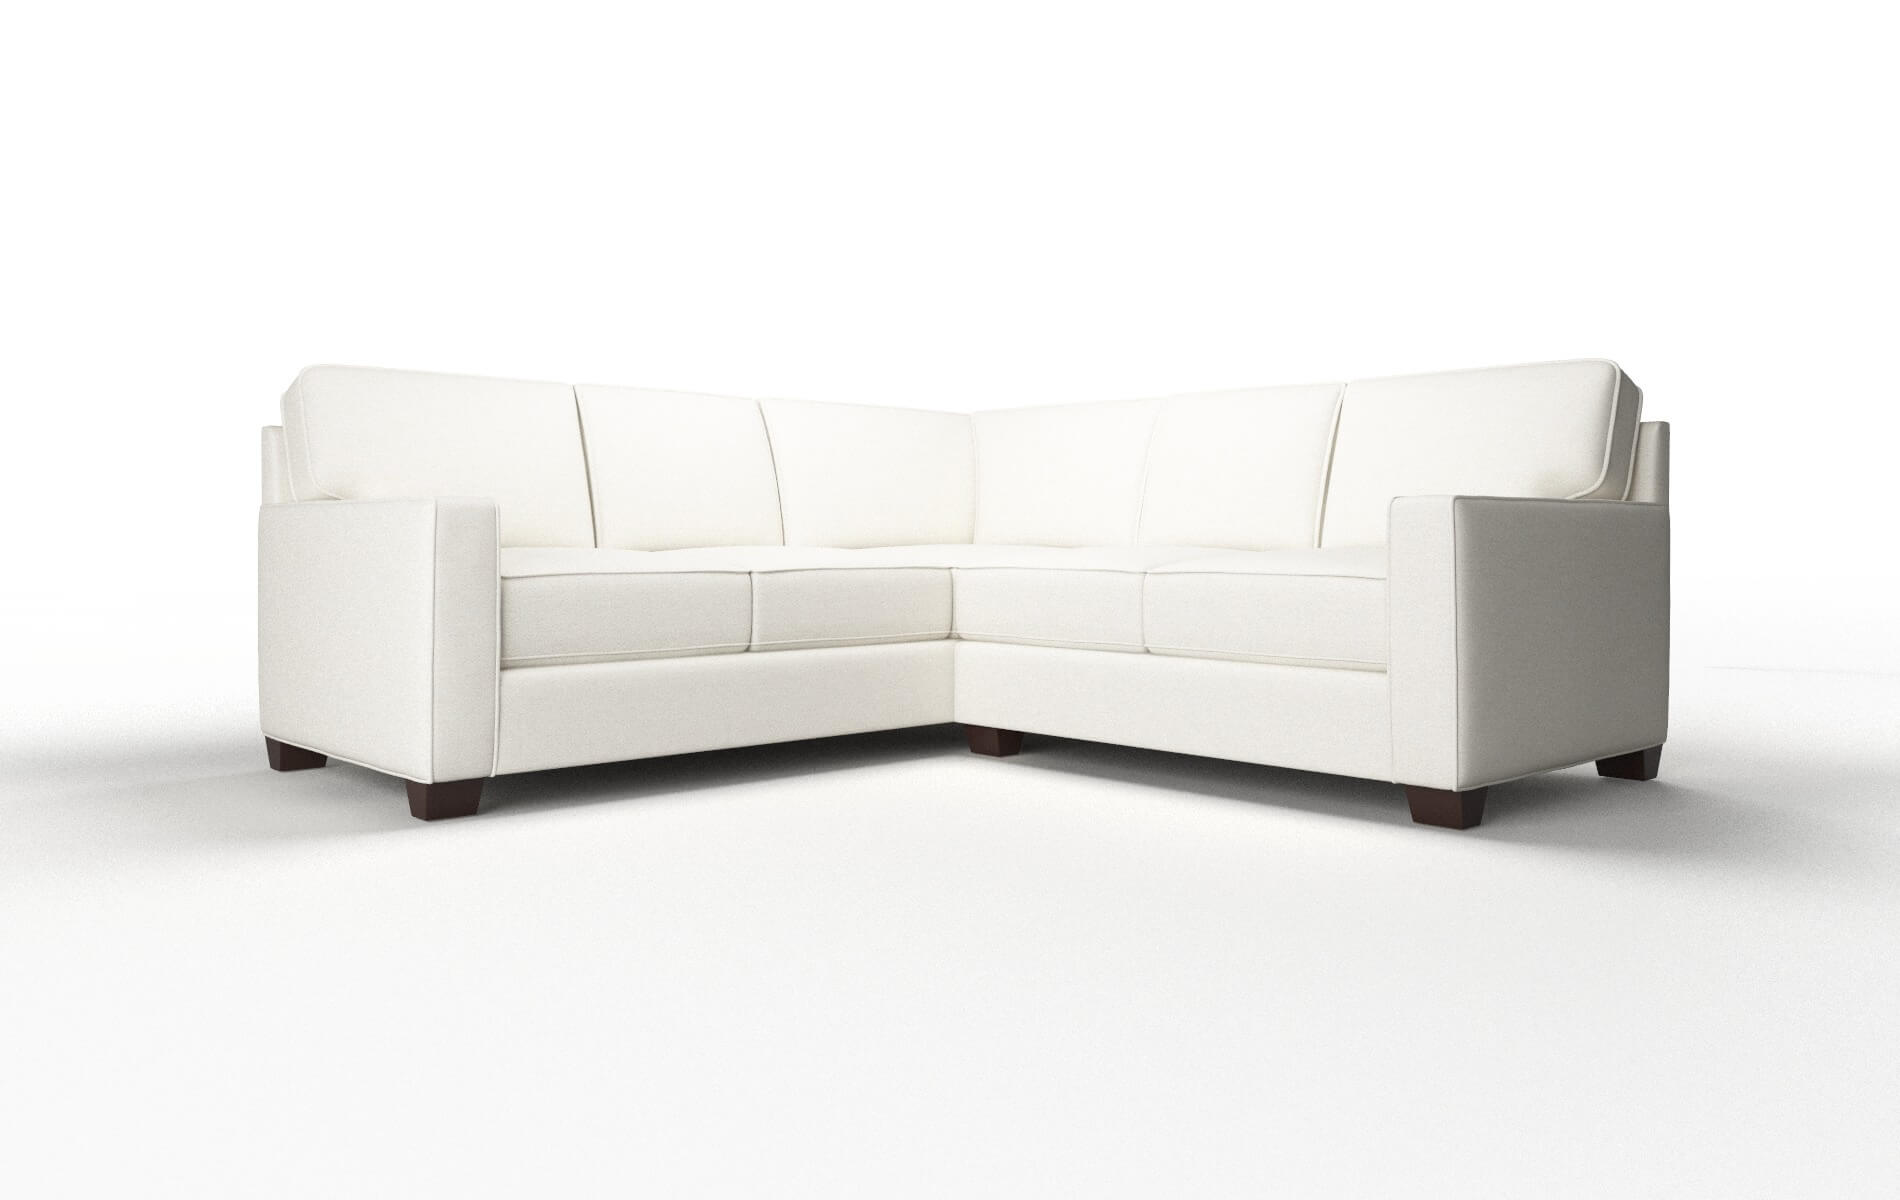 Chicago Catalina Ivory Sectional espresso legs